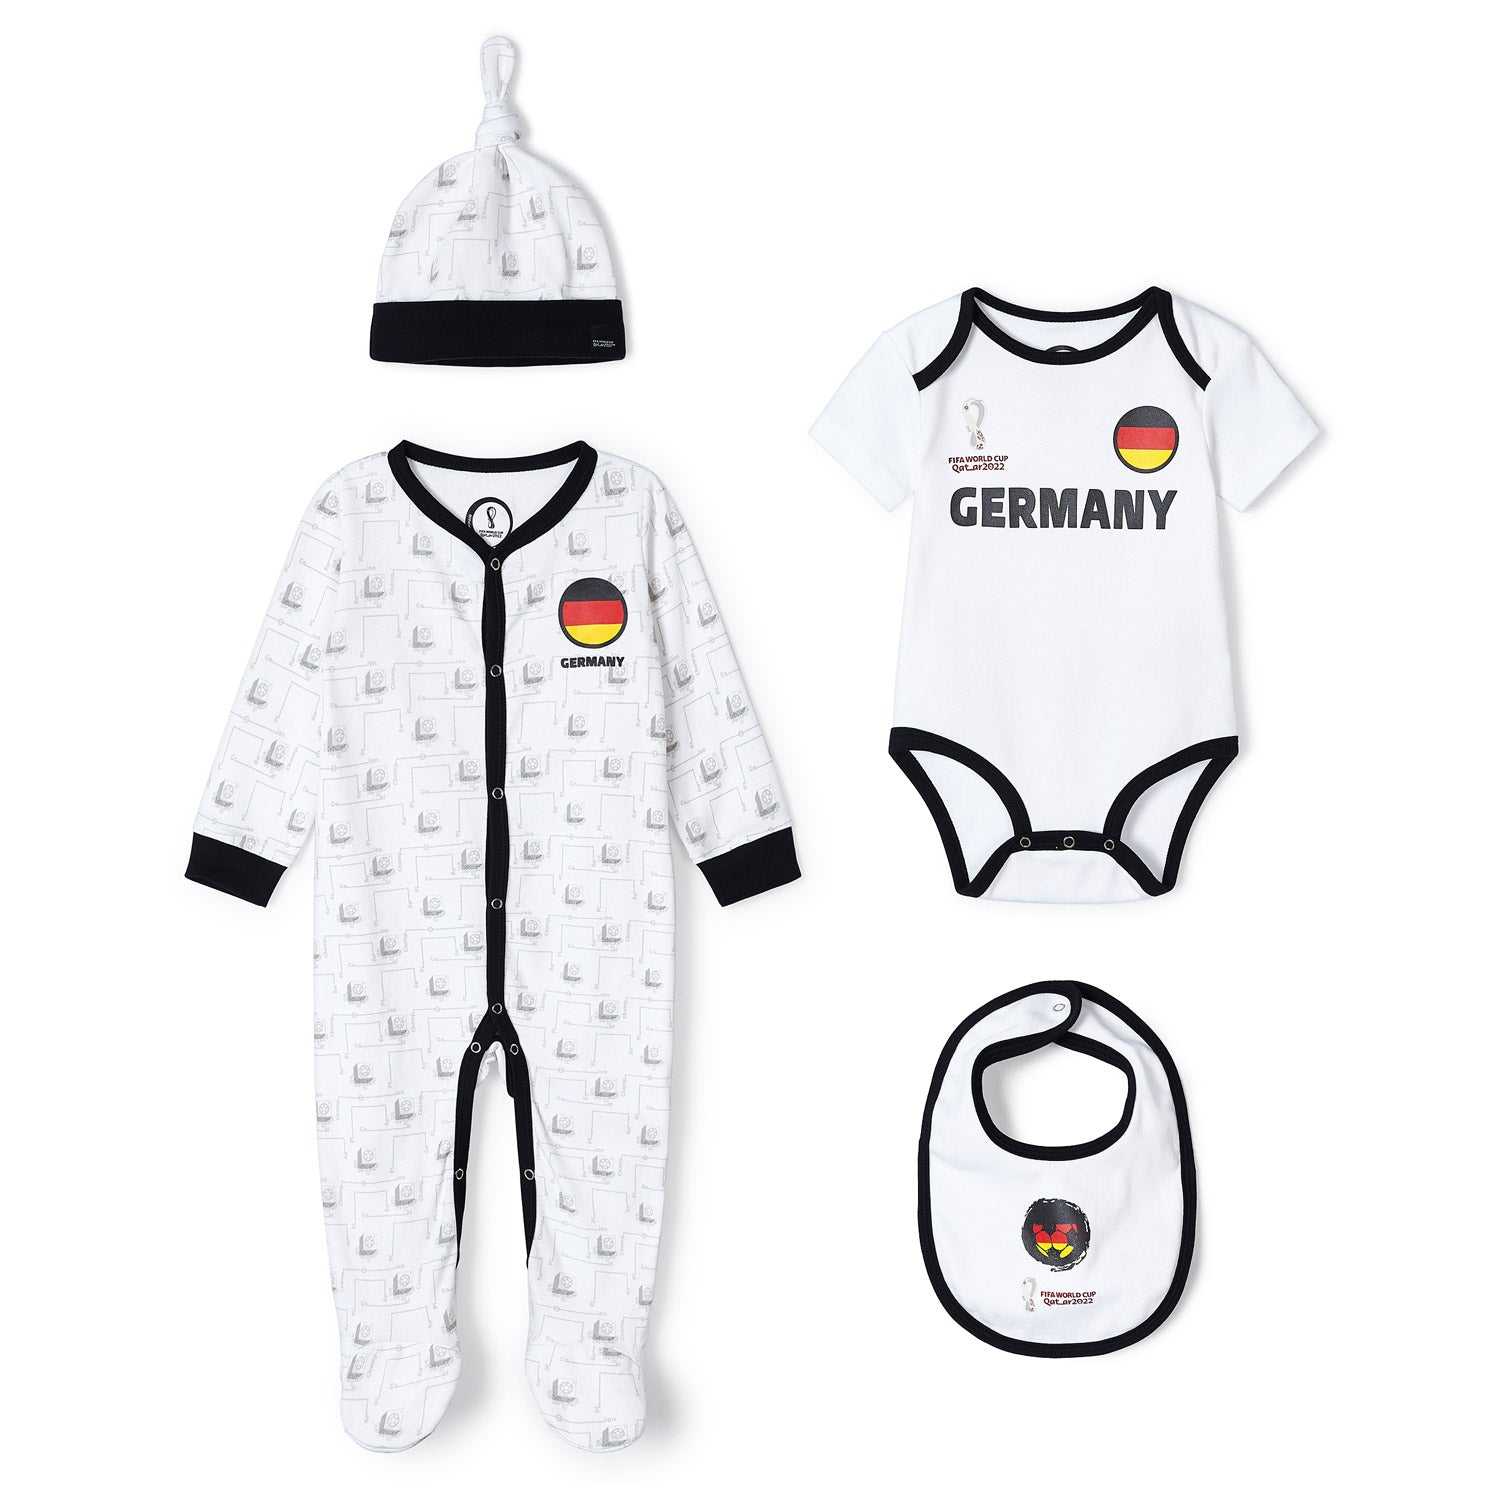 2022 World Cup Germany White Romper - Infant/Toddler